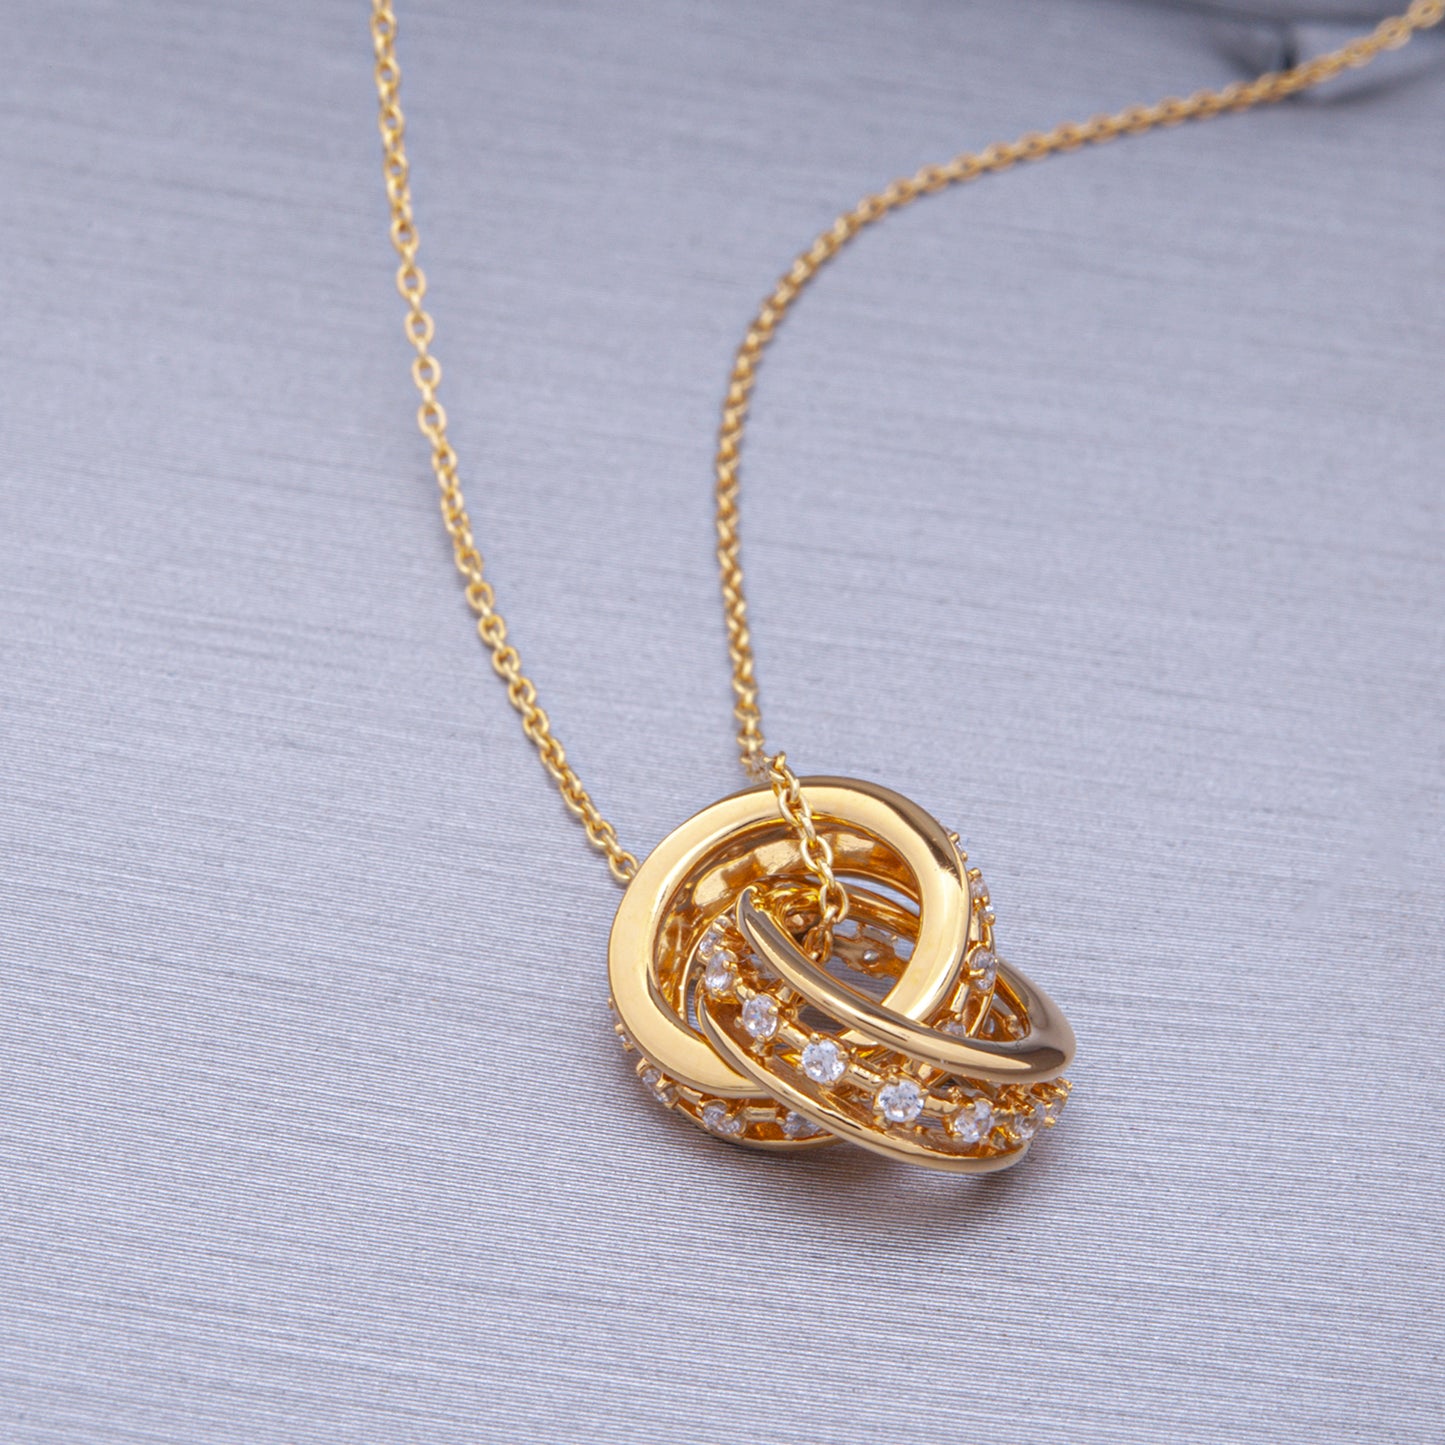 Prystn Petite Pendant in Yellow Gold with Diamonds